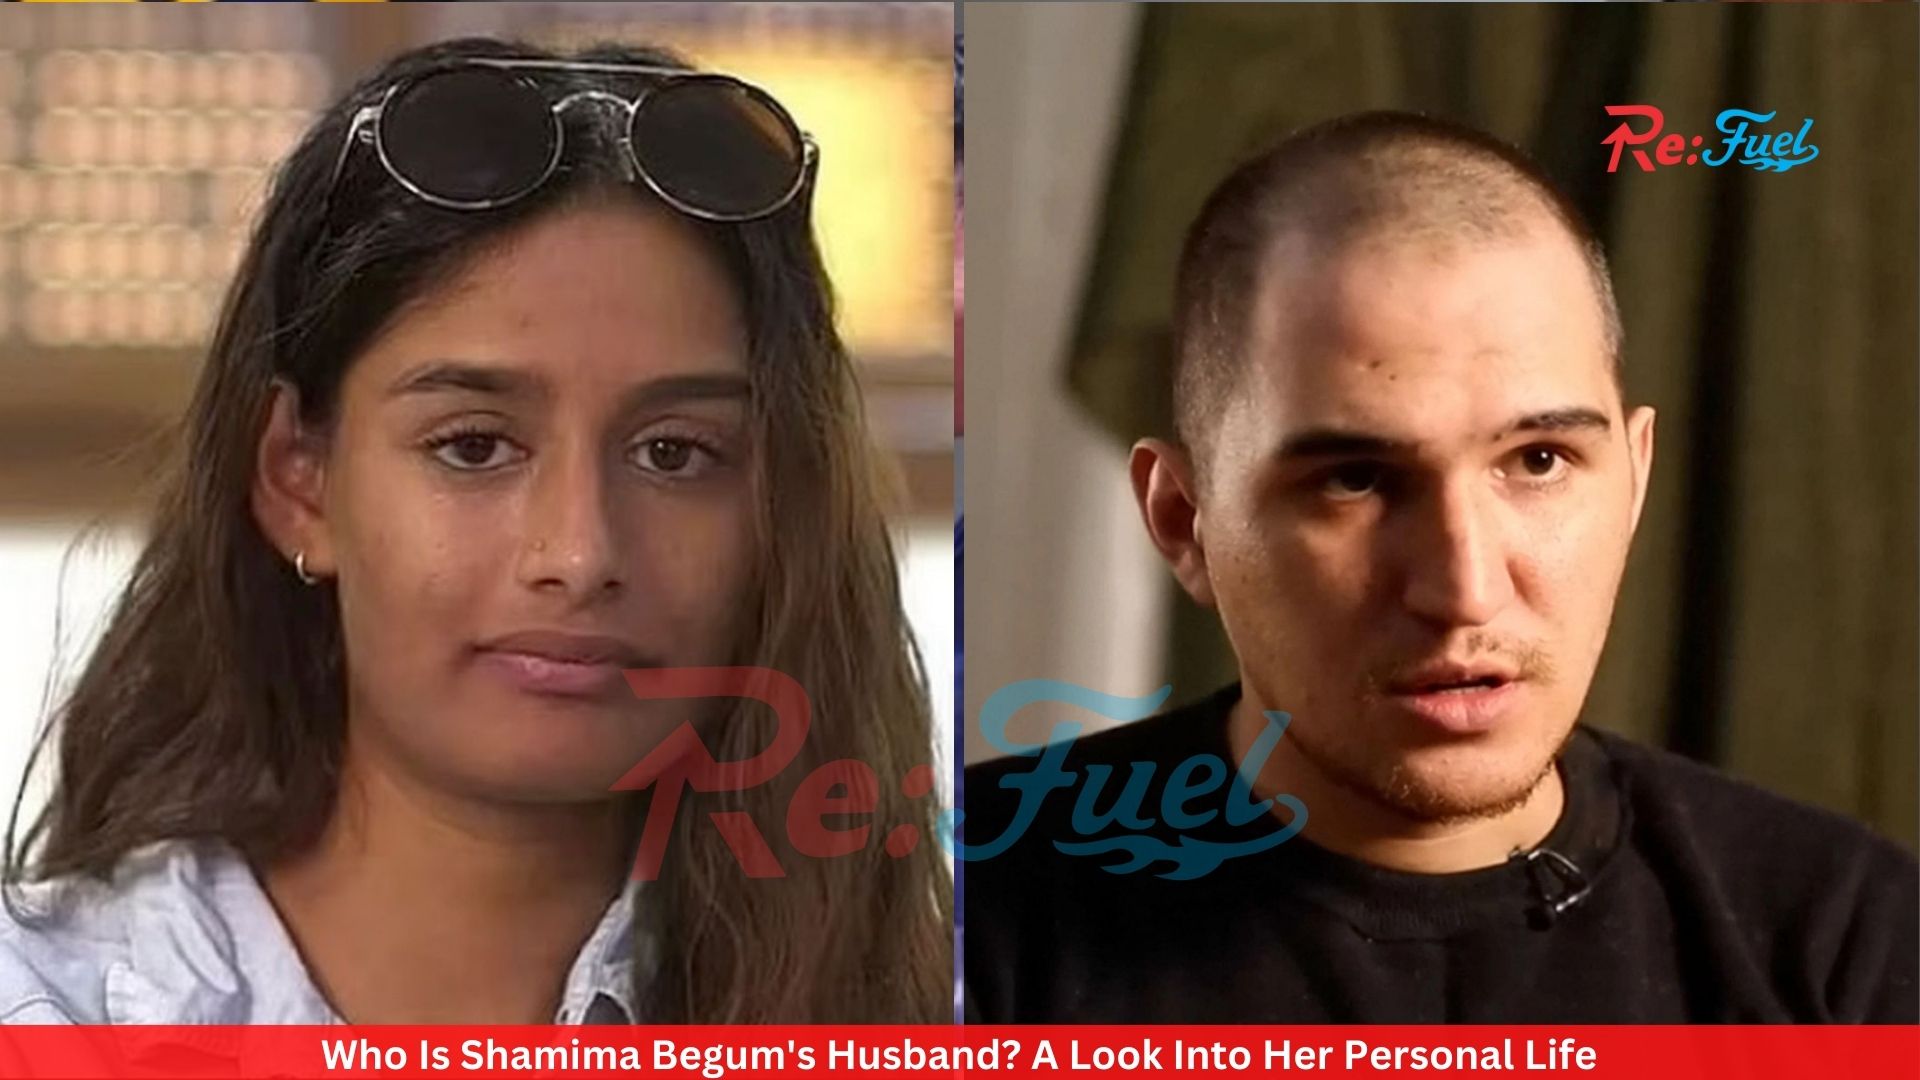 Who Is Shamima Begum's Husband? A Look Into Her Personal Life